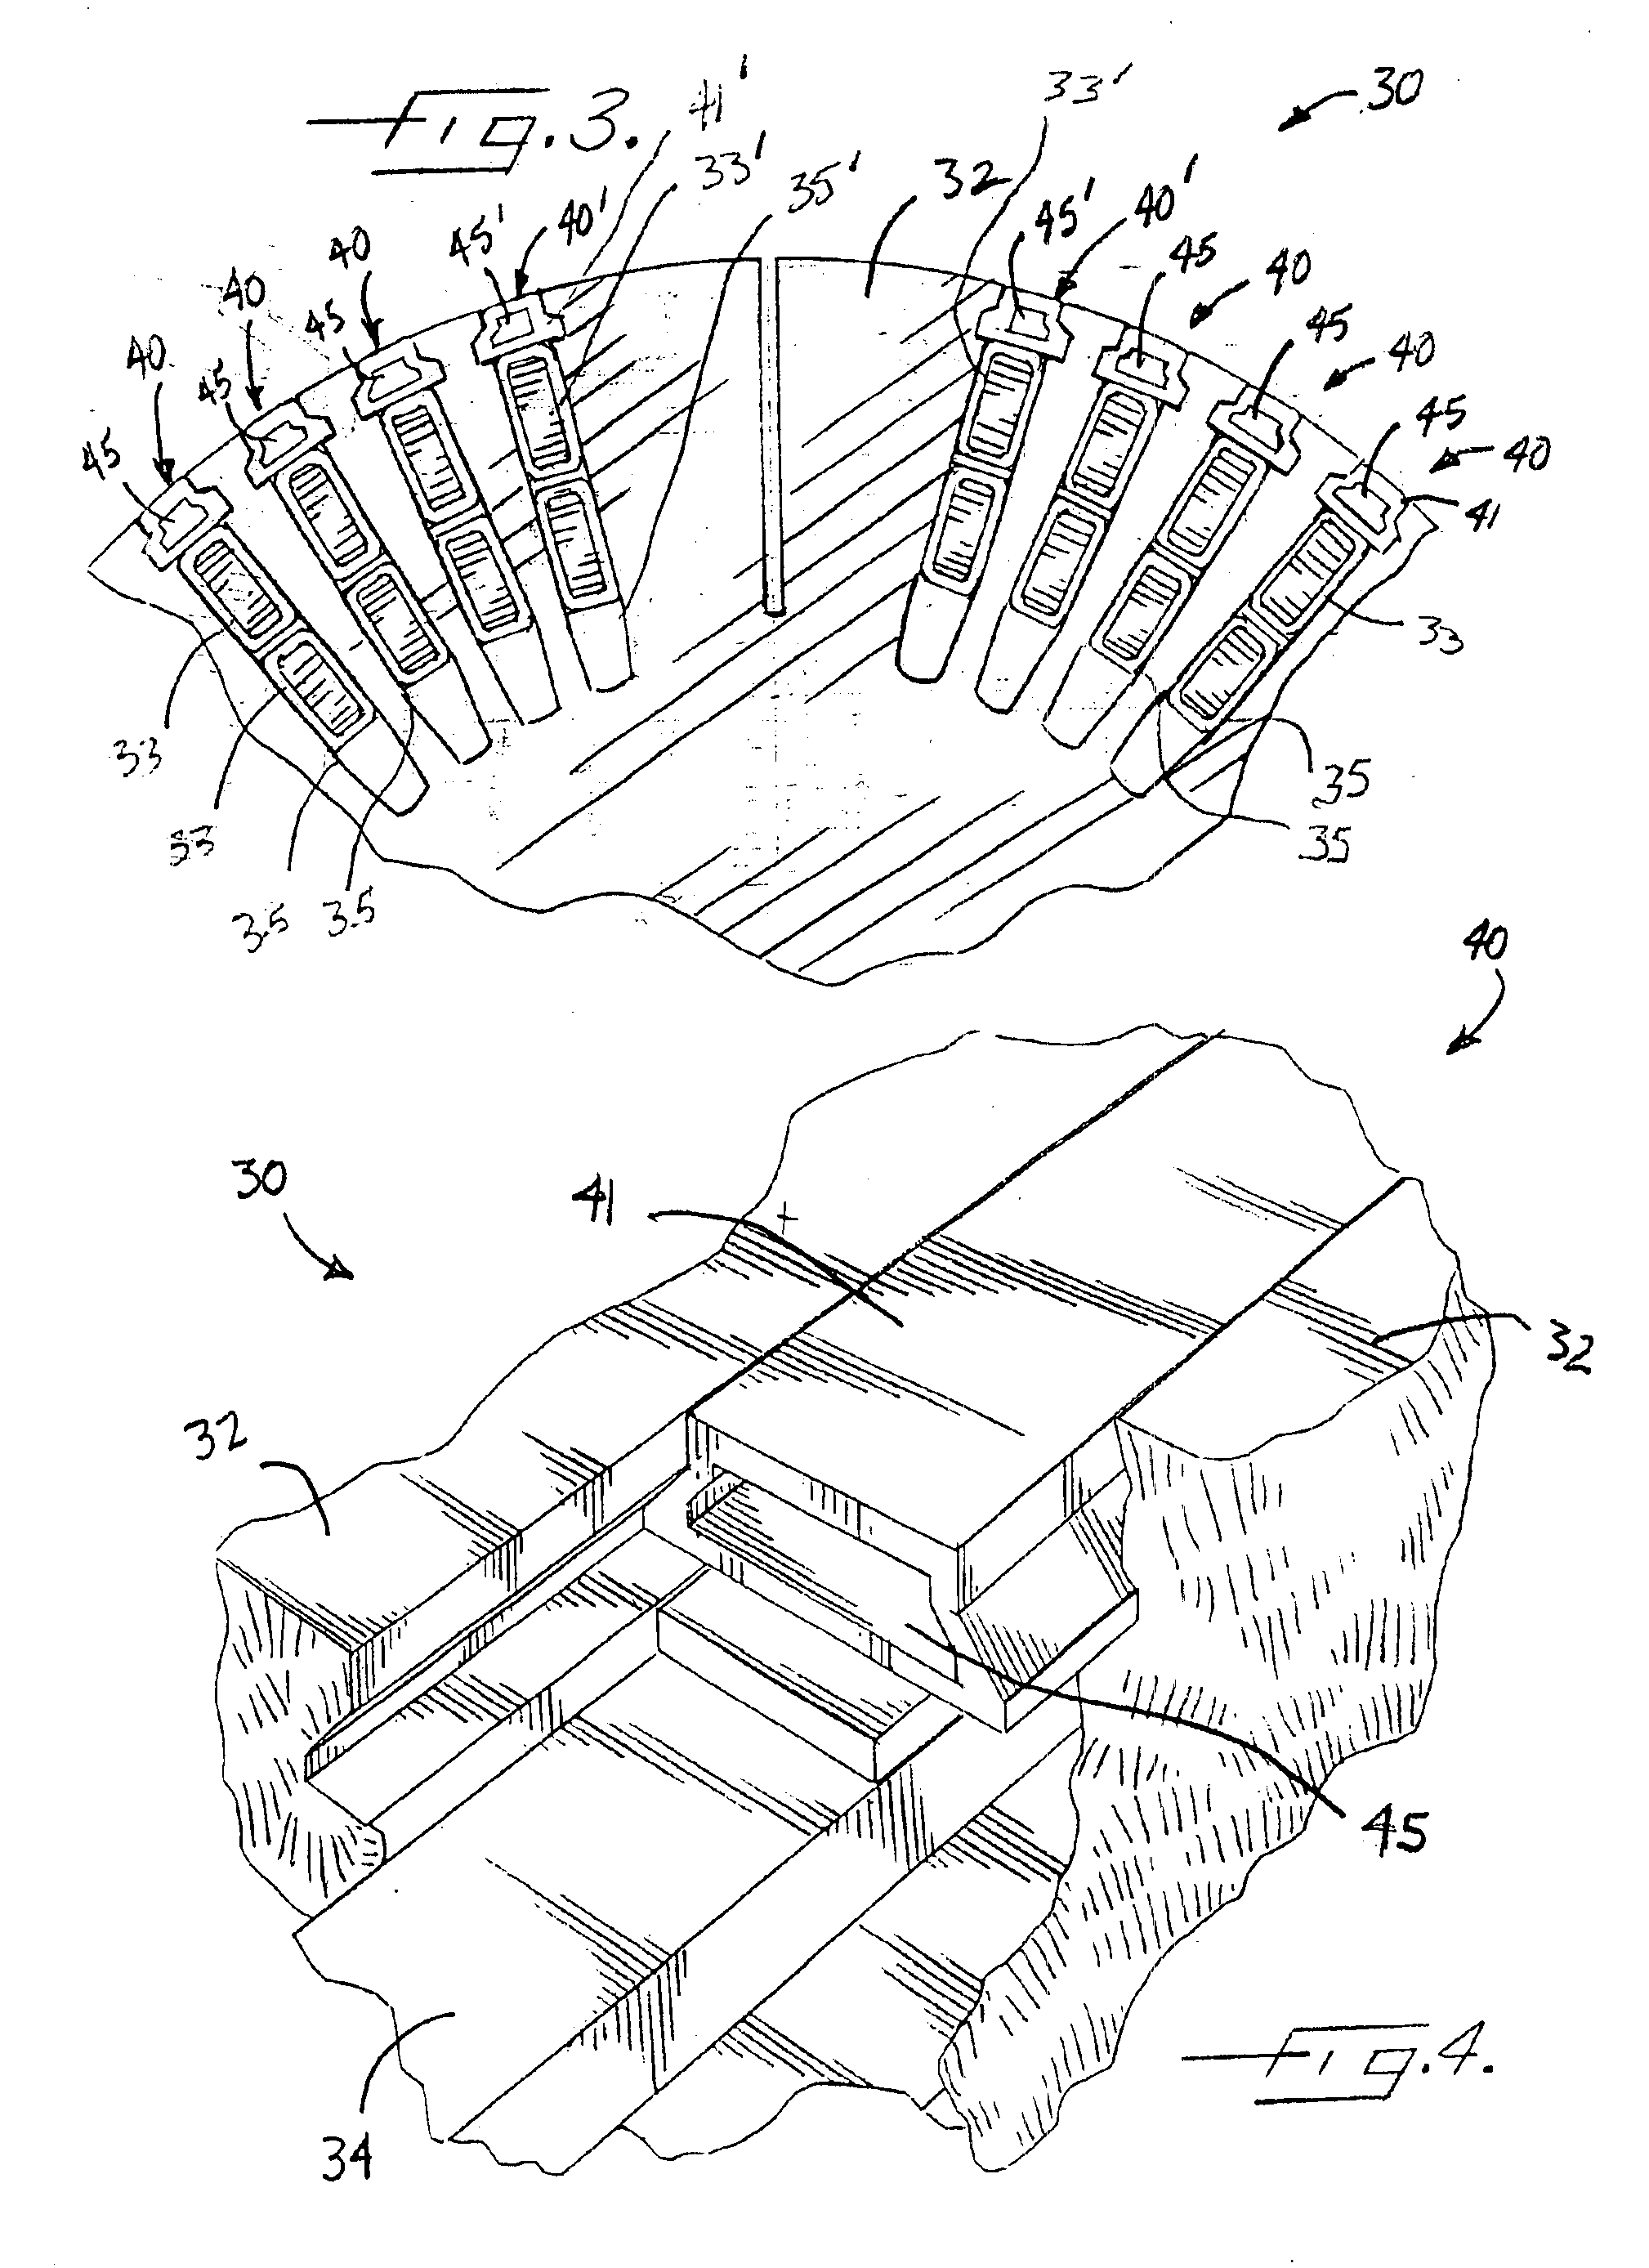 Low mass generator wedge and methods of using same